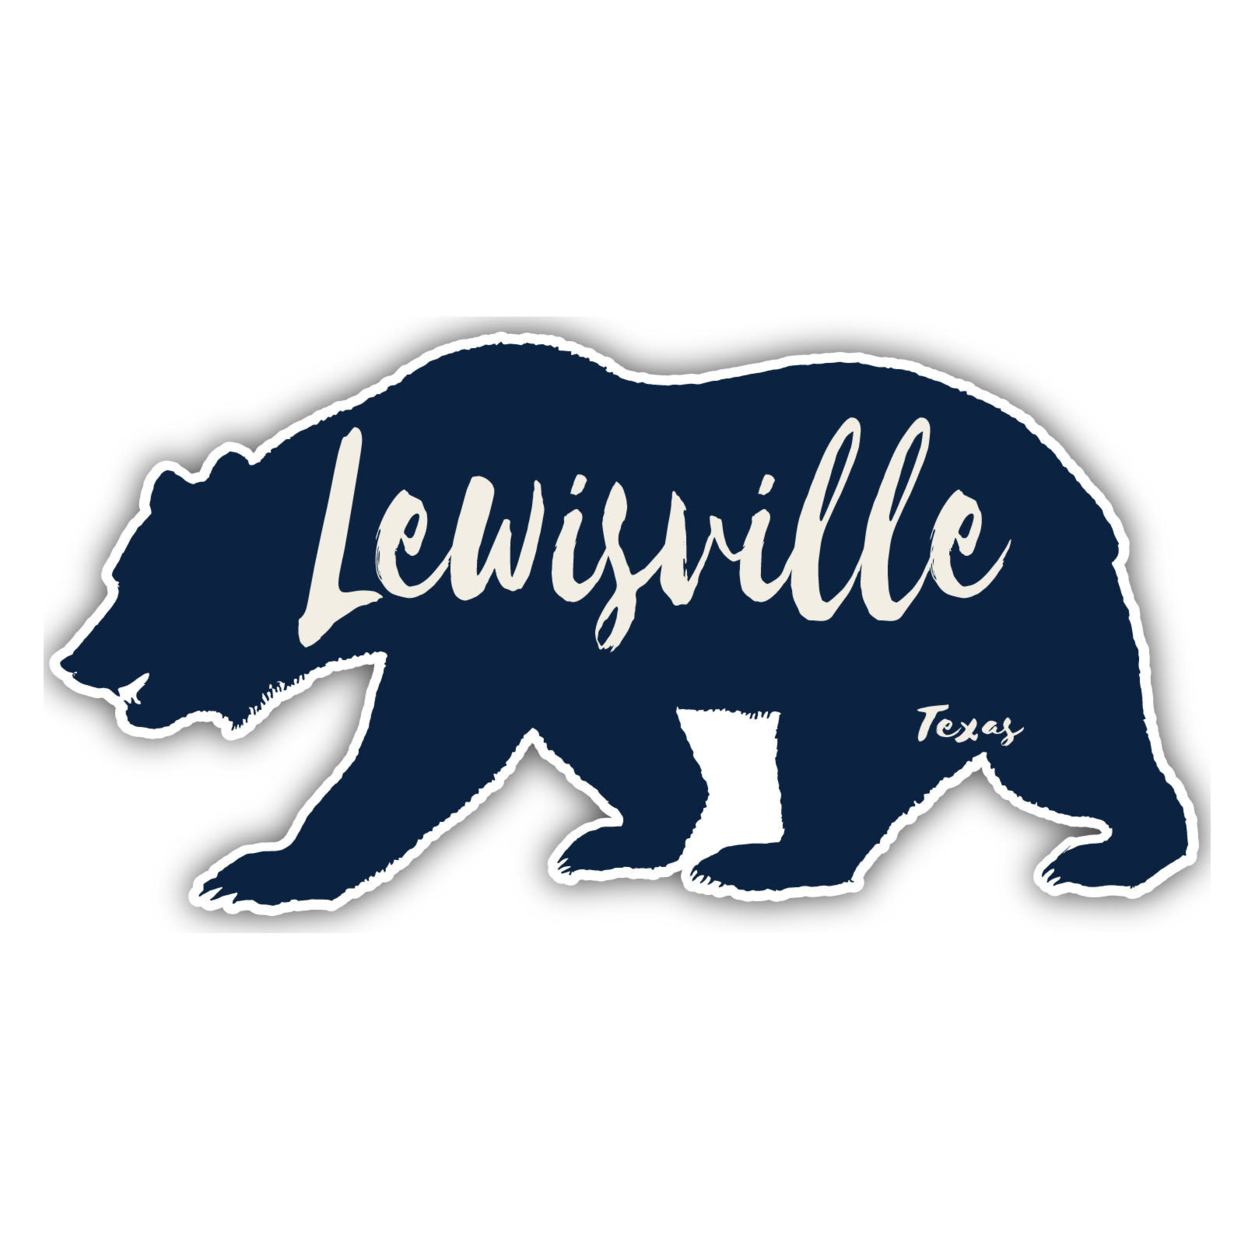 Lewisville Texas Souvenir Decorative Stickers (Choose Theme And Size) - 2-Inch, Great Outdoors